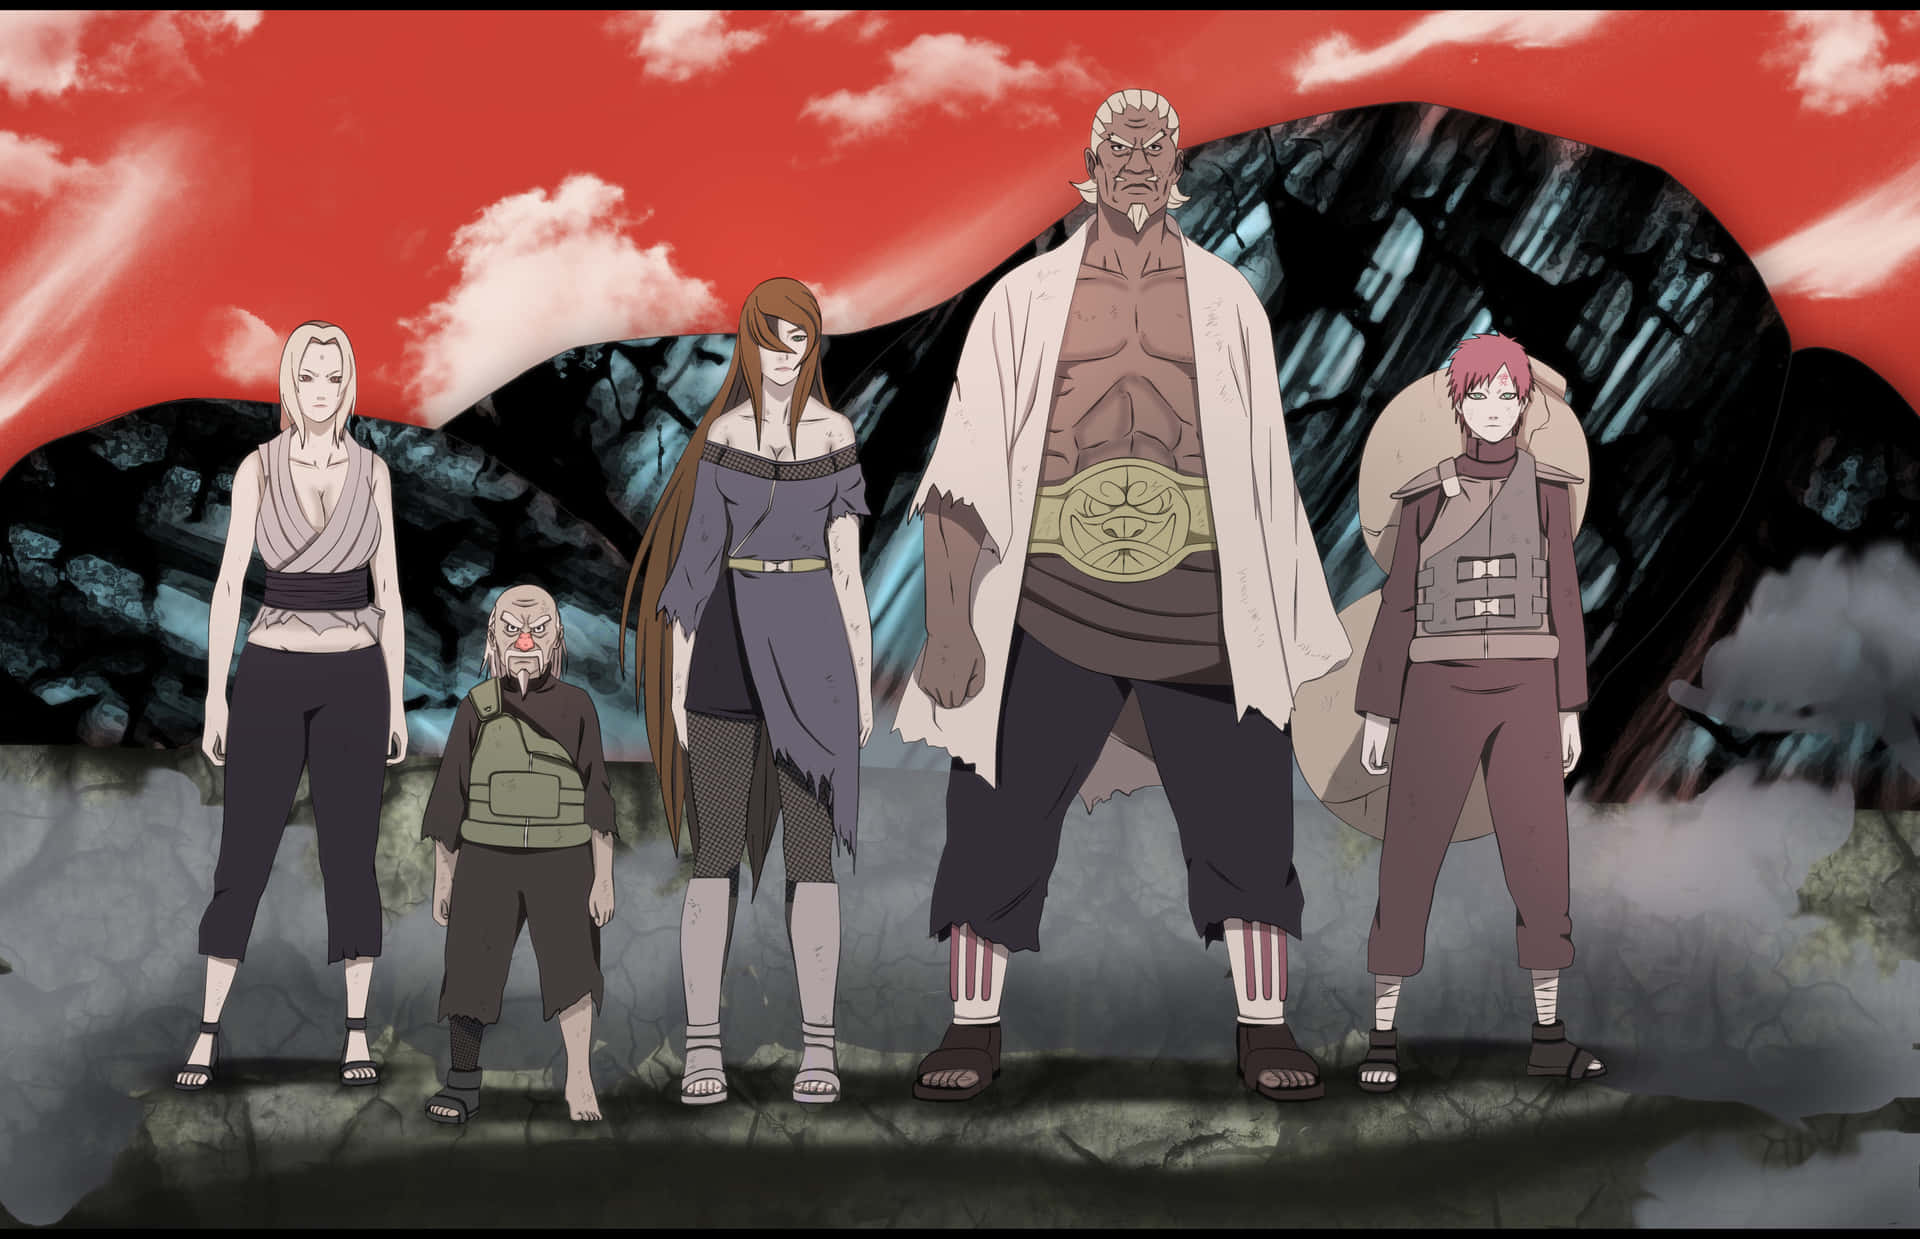 The Five Kage gathered at the Summit in the world of Naruto. Wallpaper